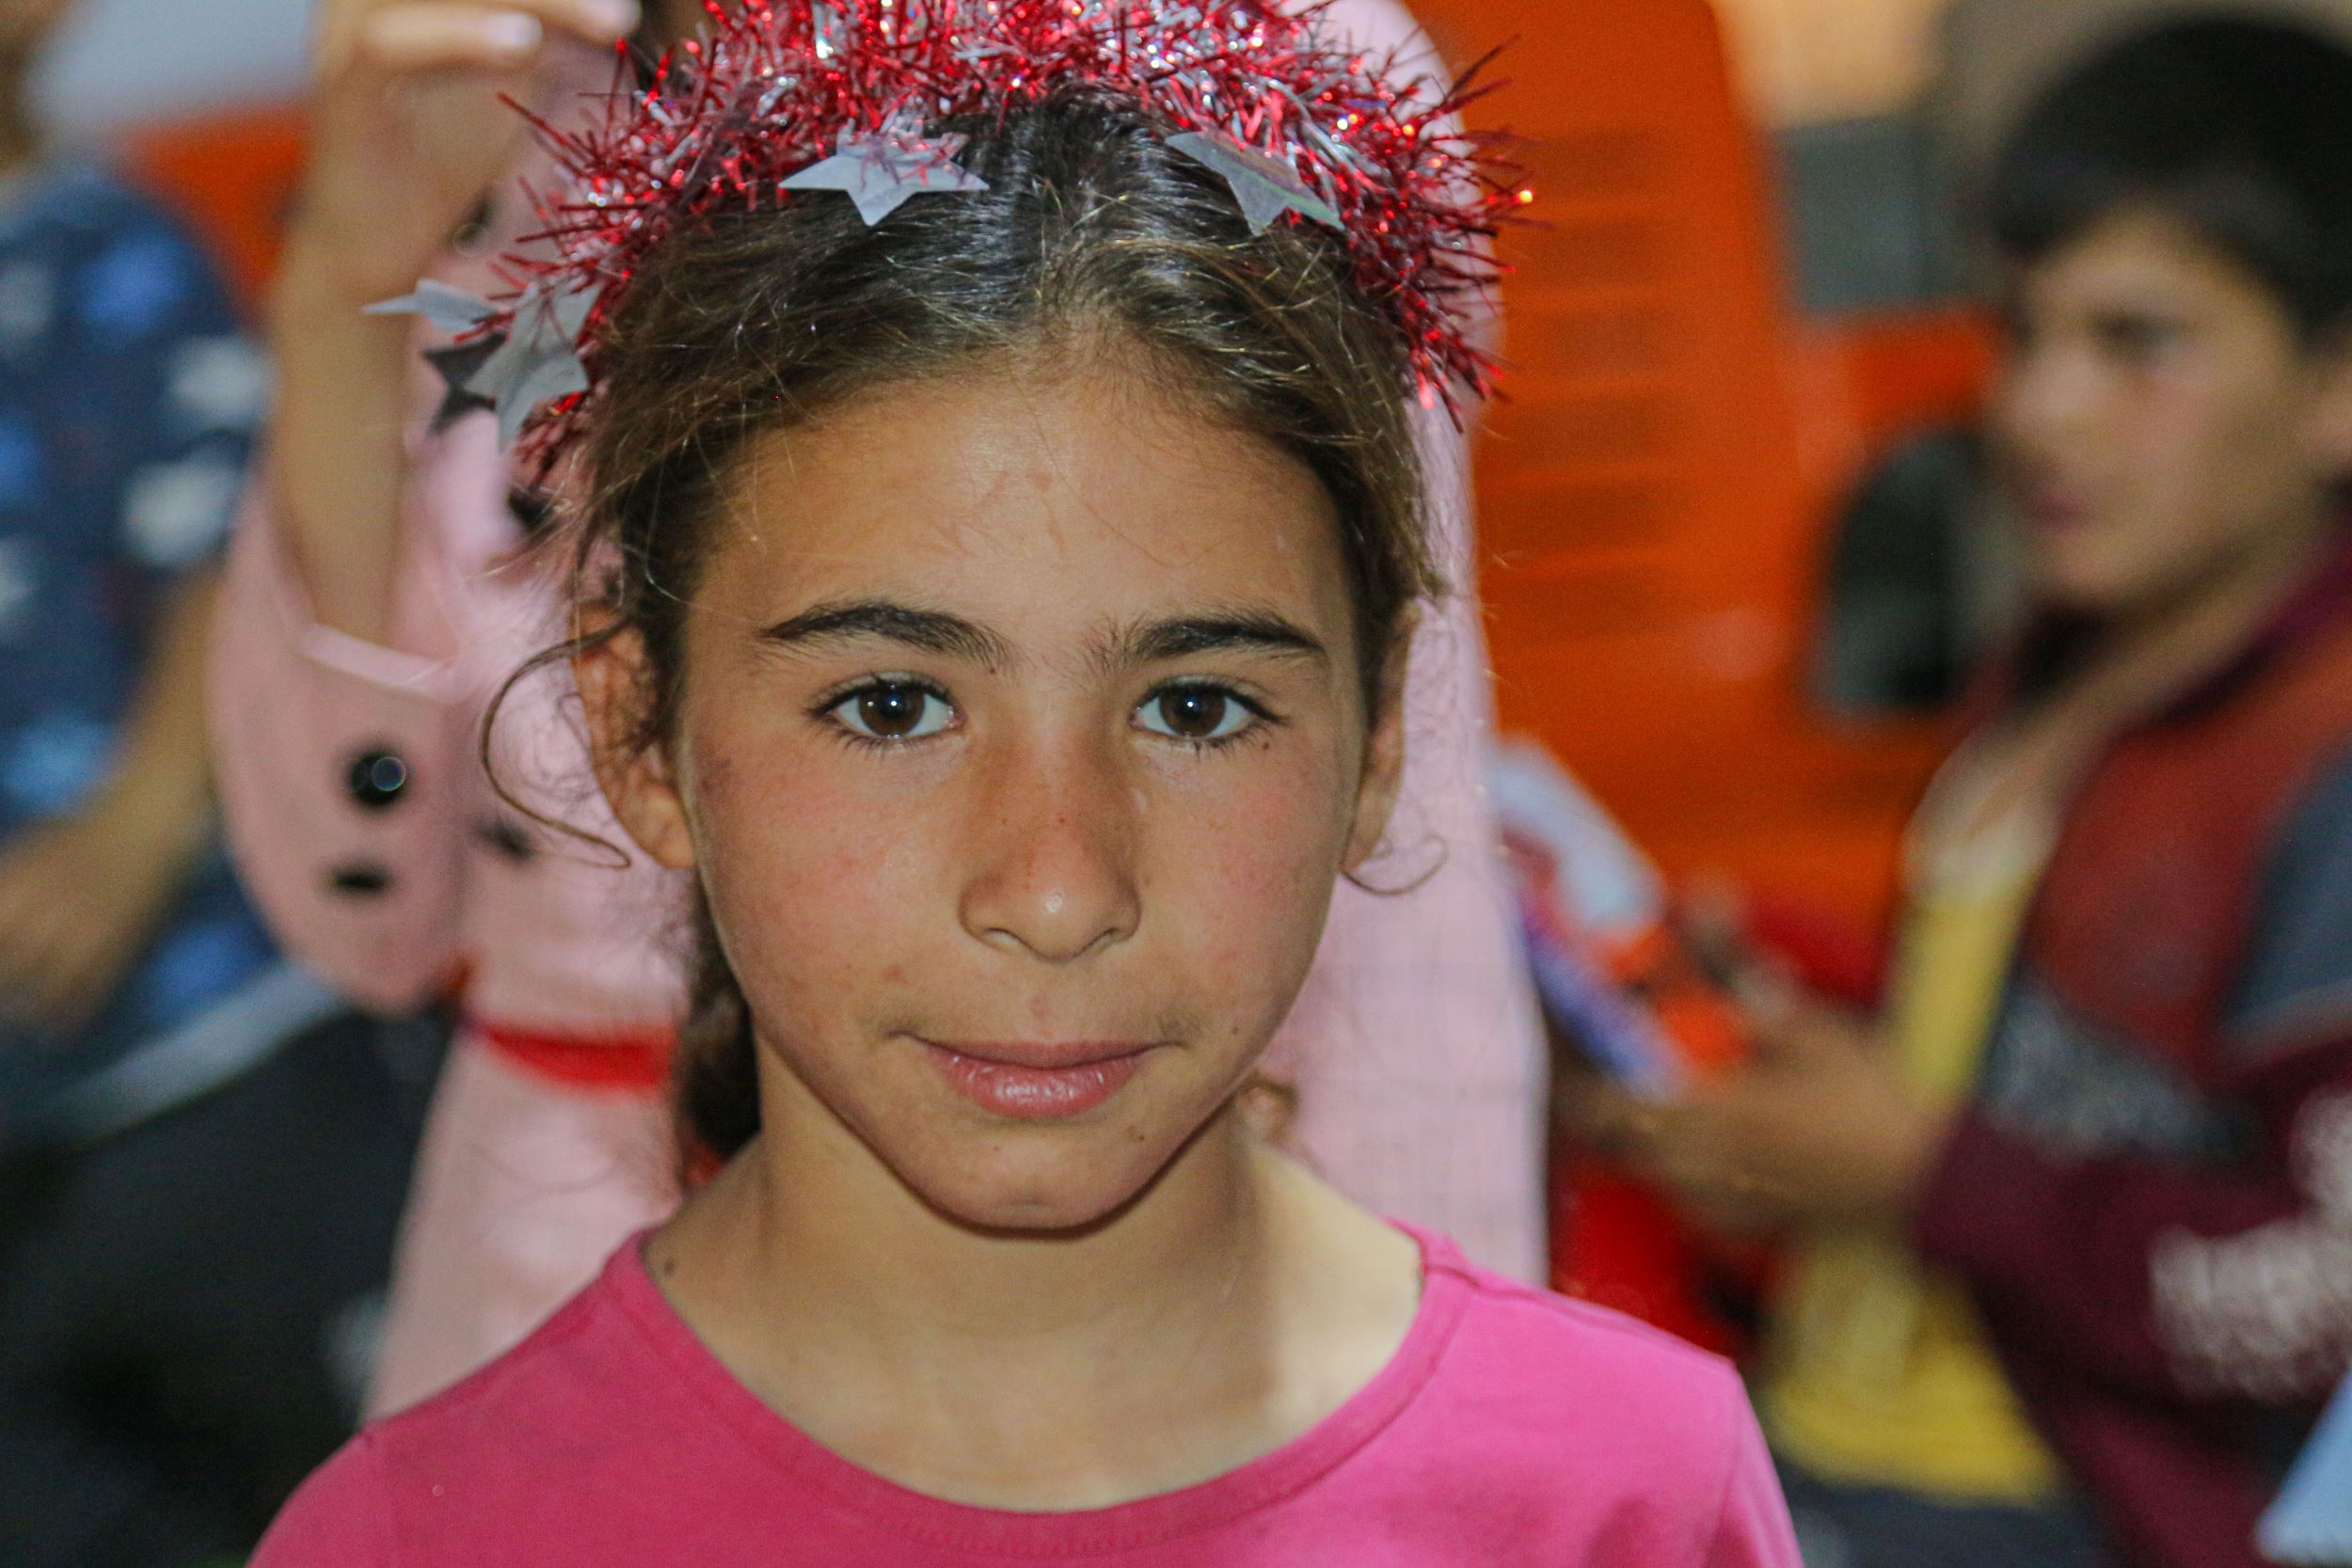 Syrian girl in pink top with red tinsel in her hair smiles at the camera